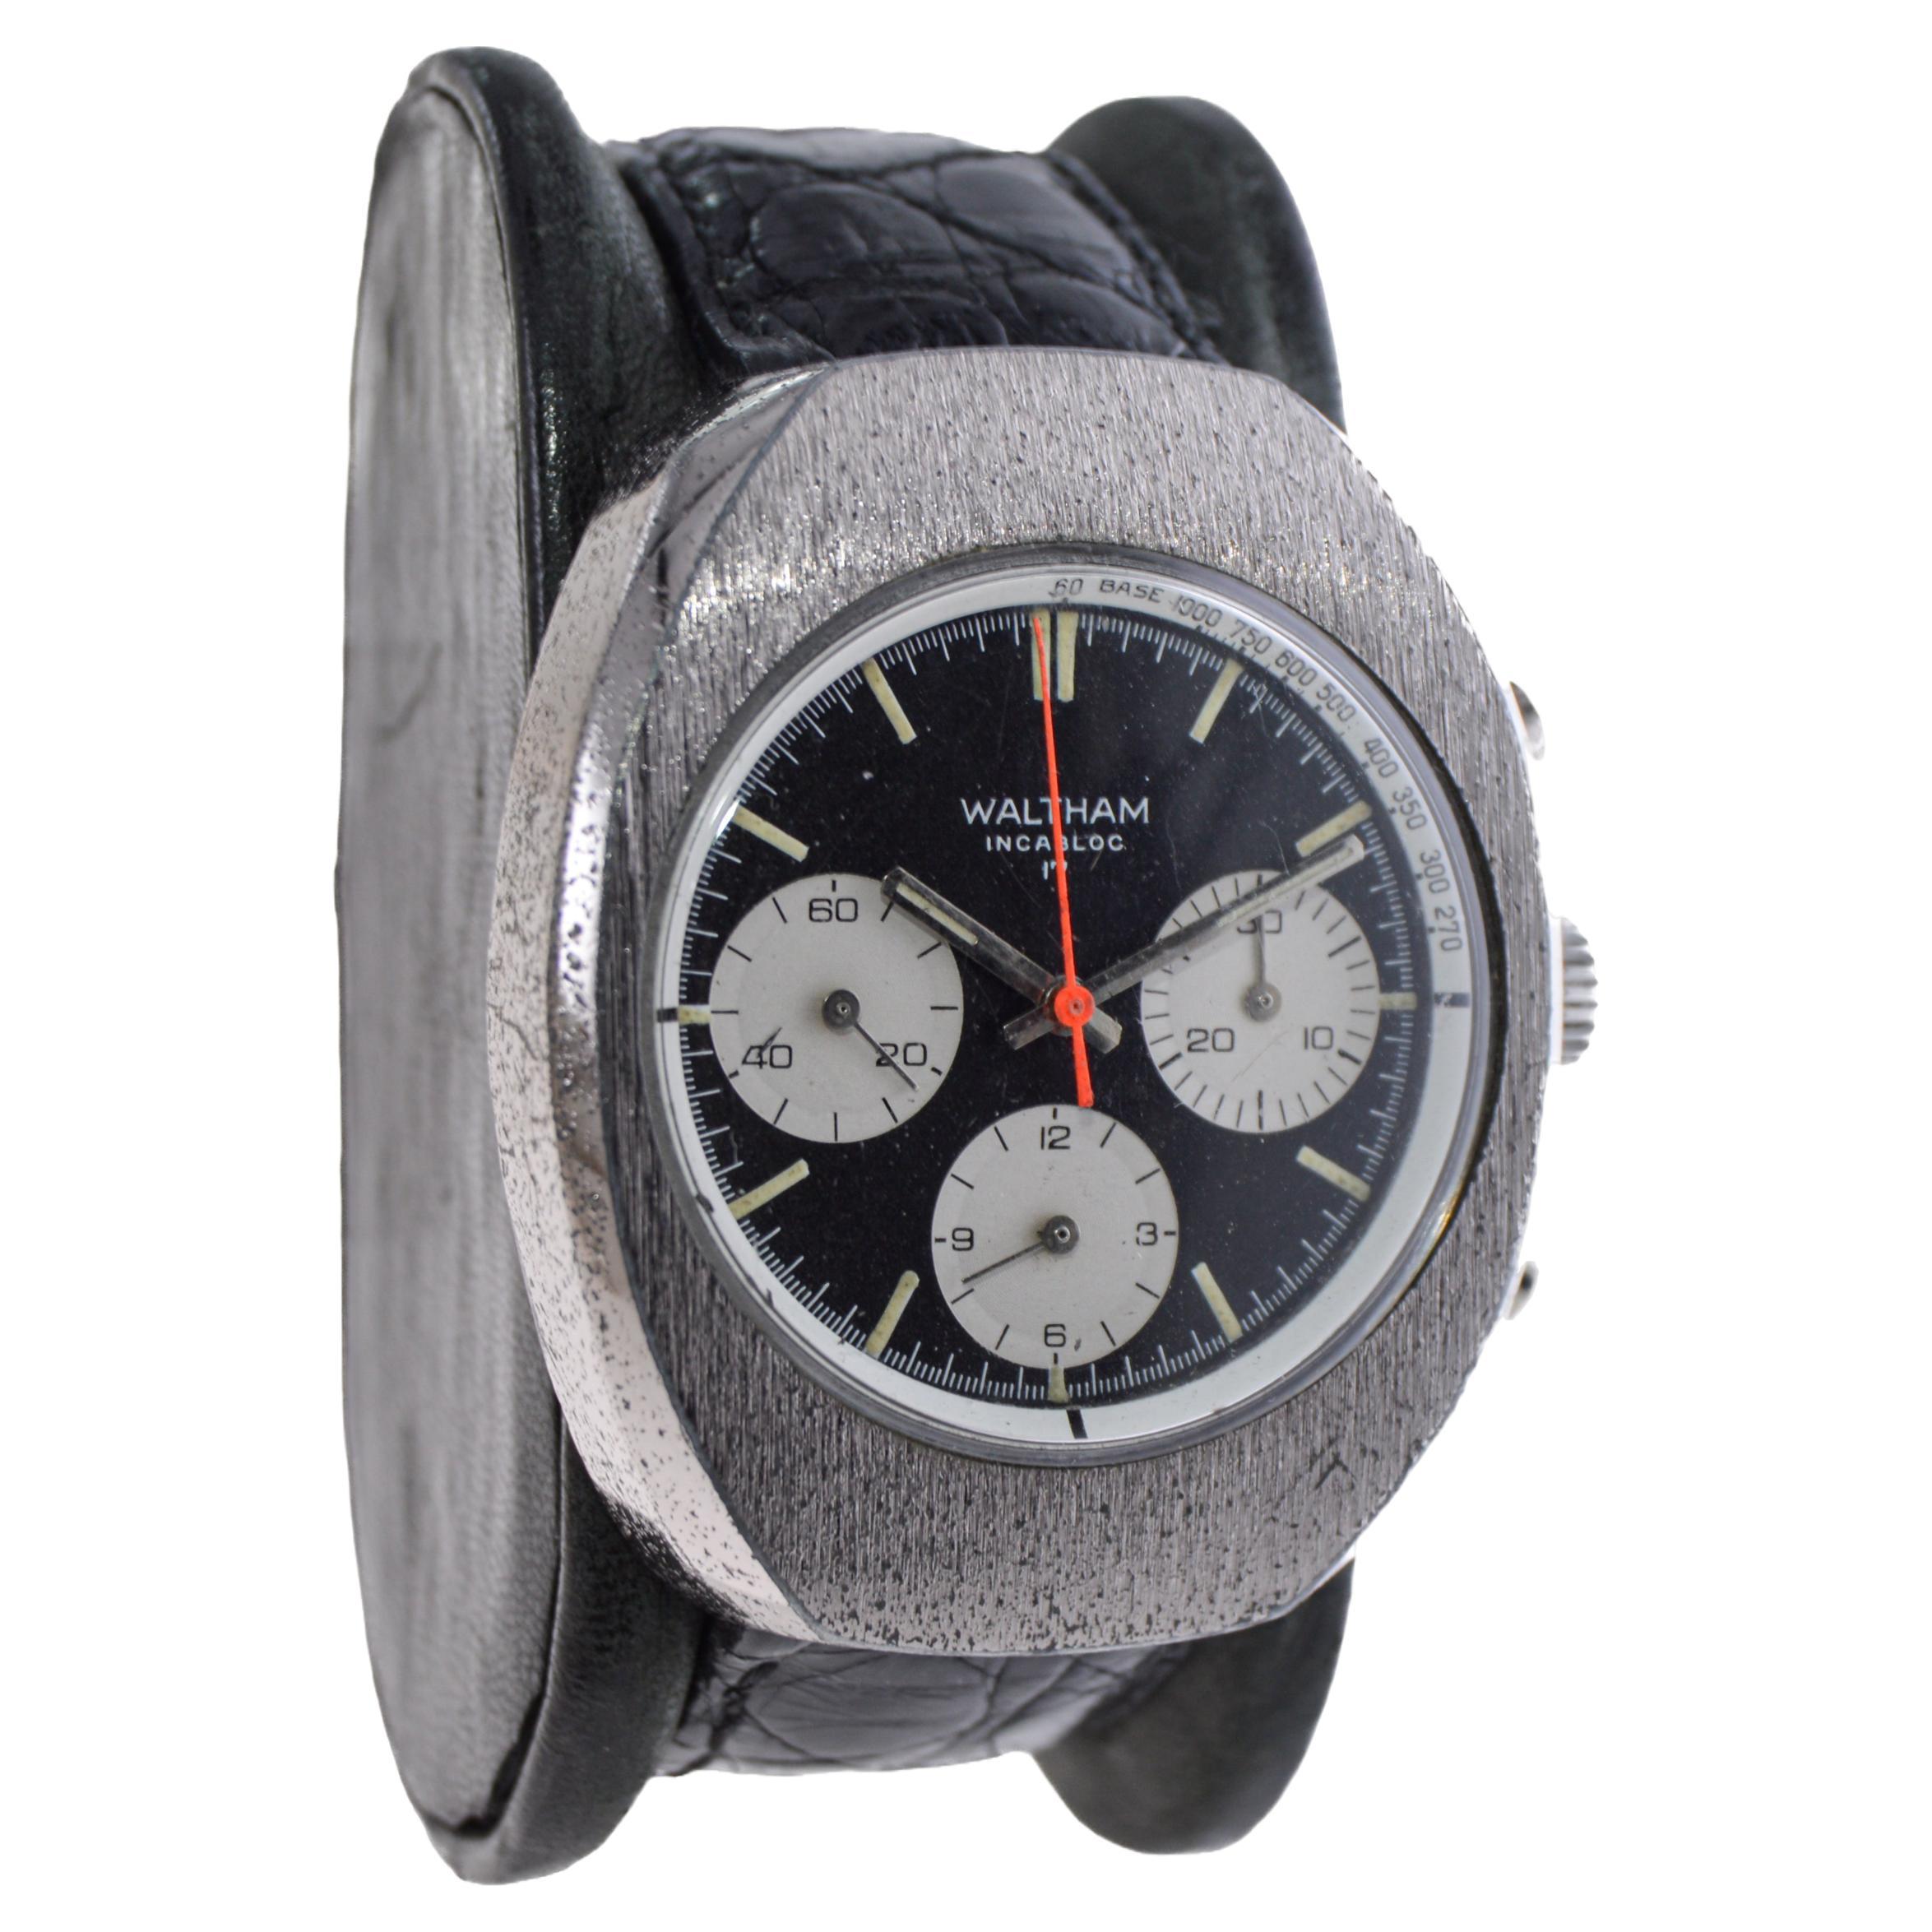 FACTORY / HOUSE: Waltham Watch Company
STYLE / REFERENCE: Chronograph / Tonneau Shaped
METAL / MATERIAL: Chromium on Bronze
CIRCA: 1960's
DIMENSIONS: Length 46mm X Width 38mm
MOVEMENT / CALIBER: Manual Winding / 17 Jewels 
DIAL / HANDS: Original